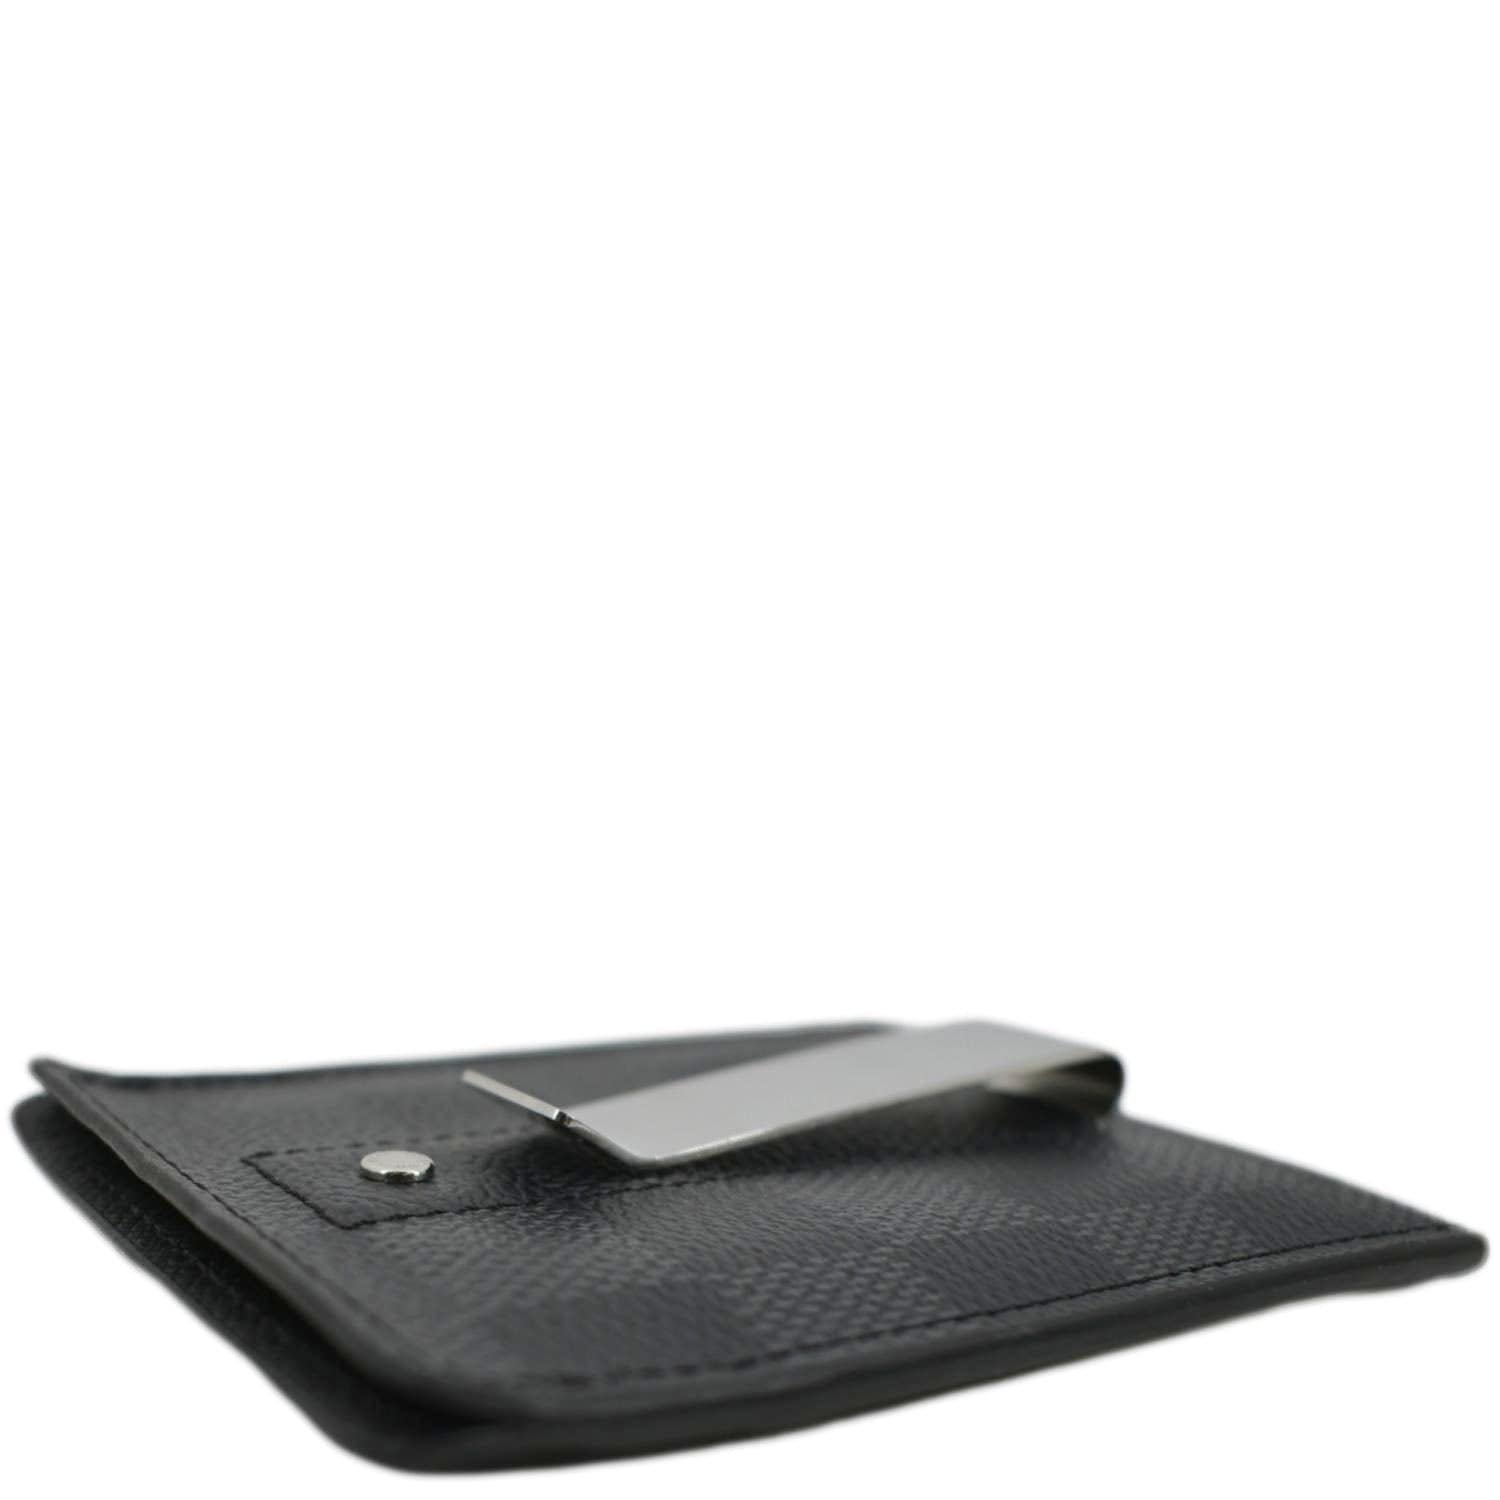 Louis Vuitton, Accessories, Credit Card Or Business Card Holder In Louis  Vuitton Graphite